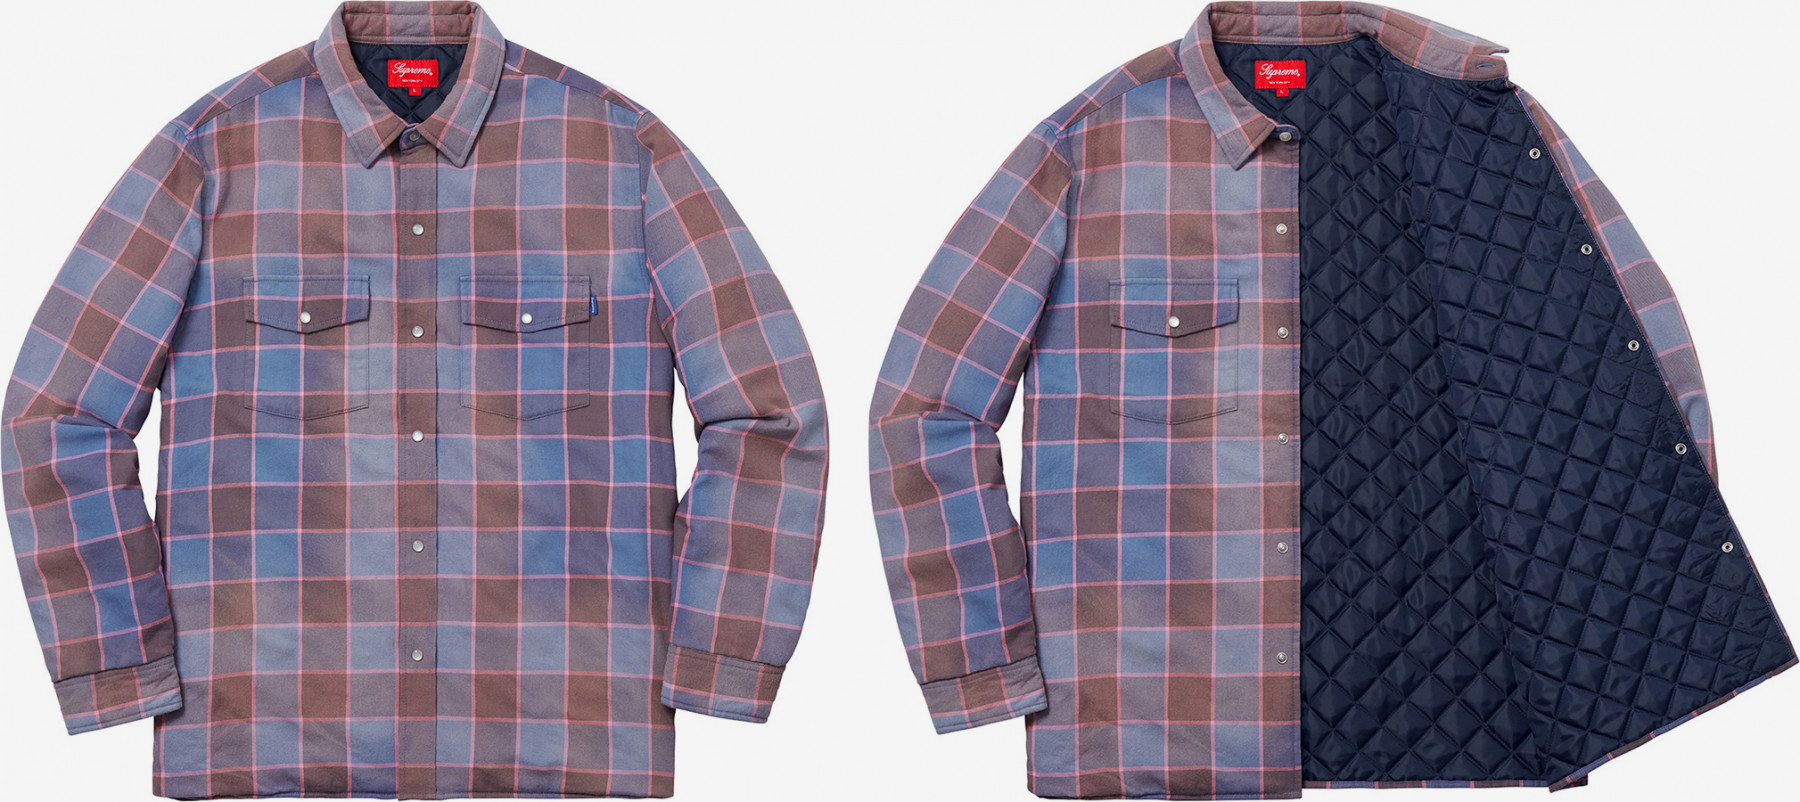 supreme-drop-list-quilted-faded-plaid-shirt-1800x802.jpg